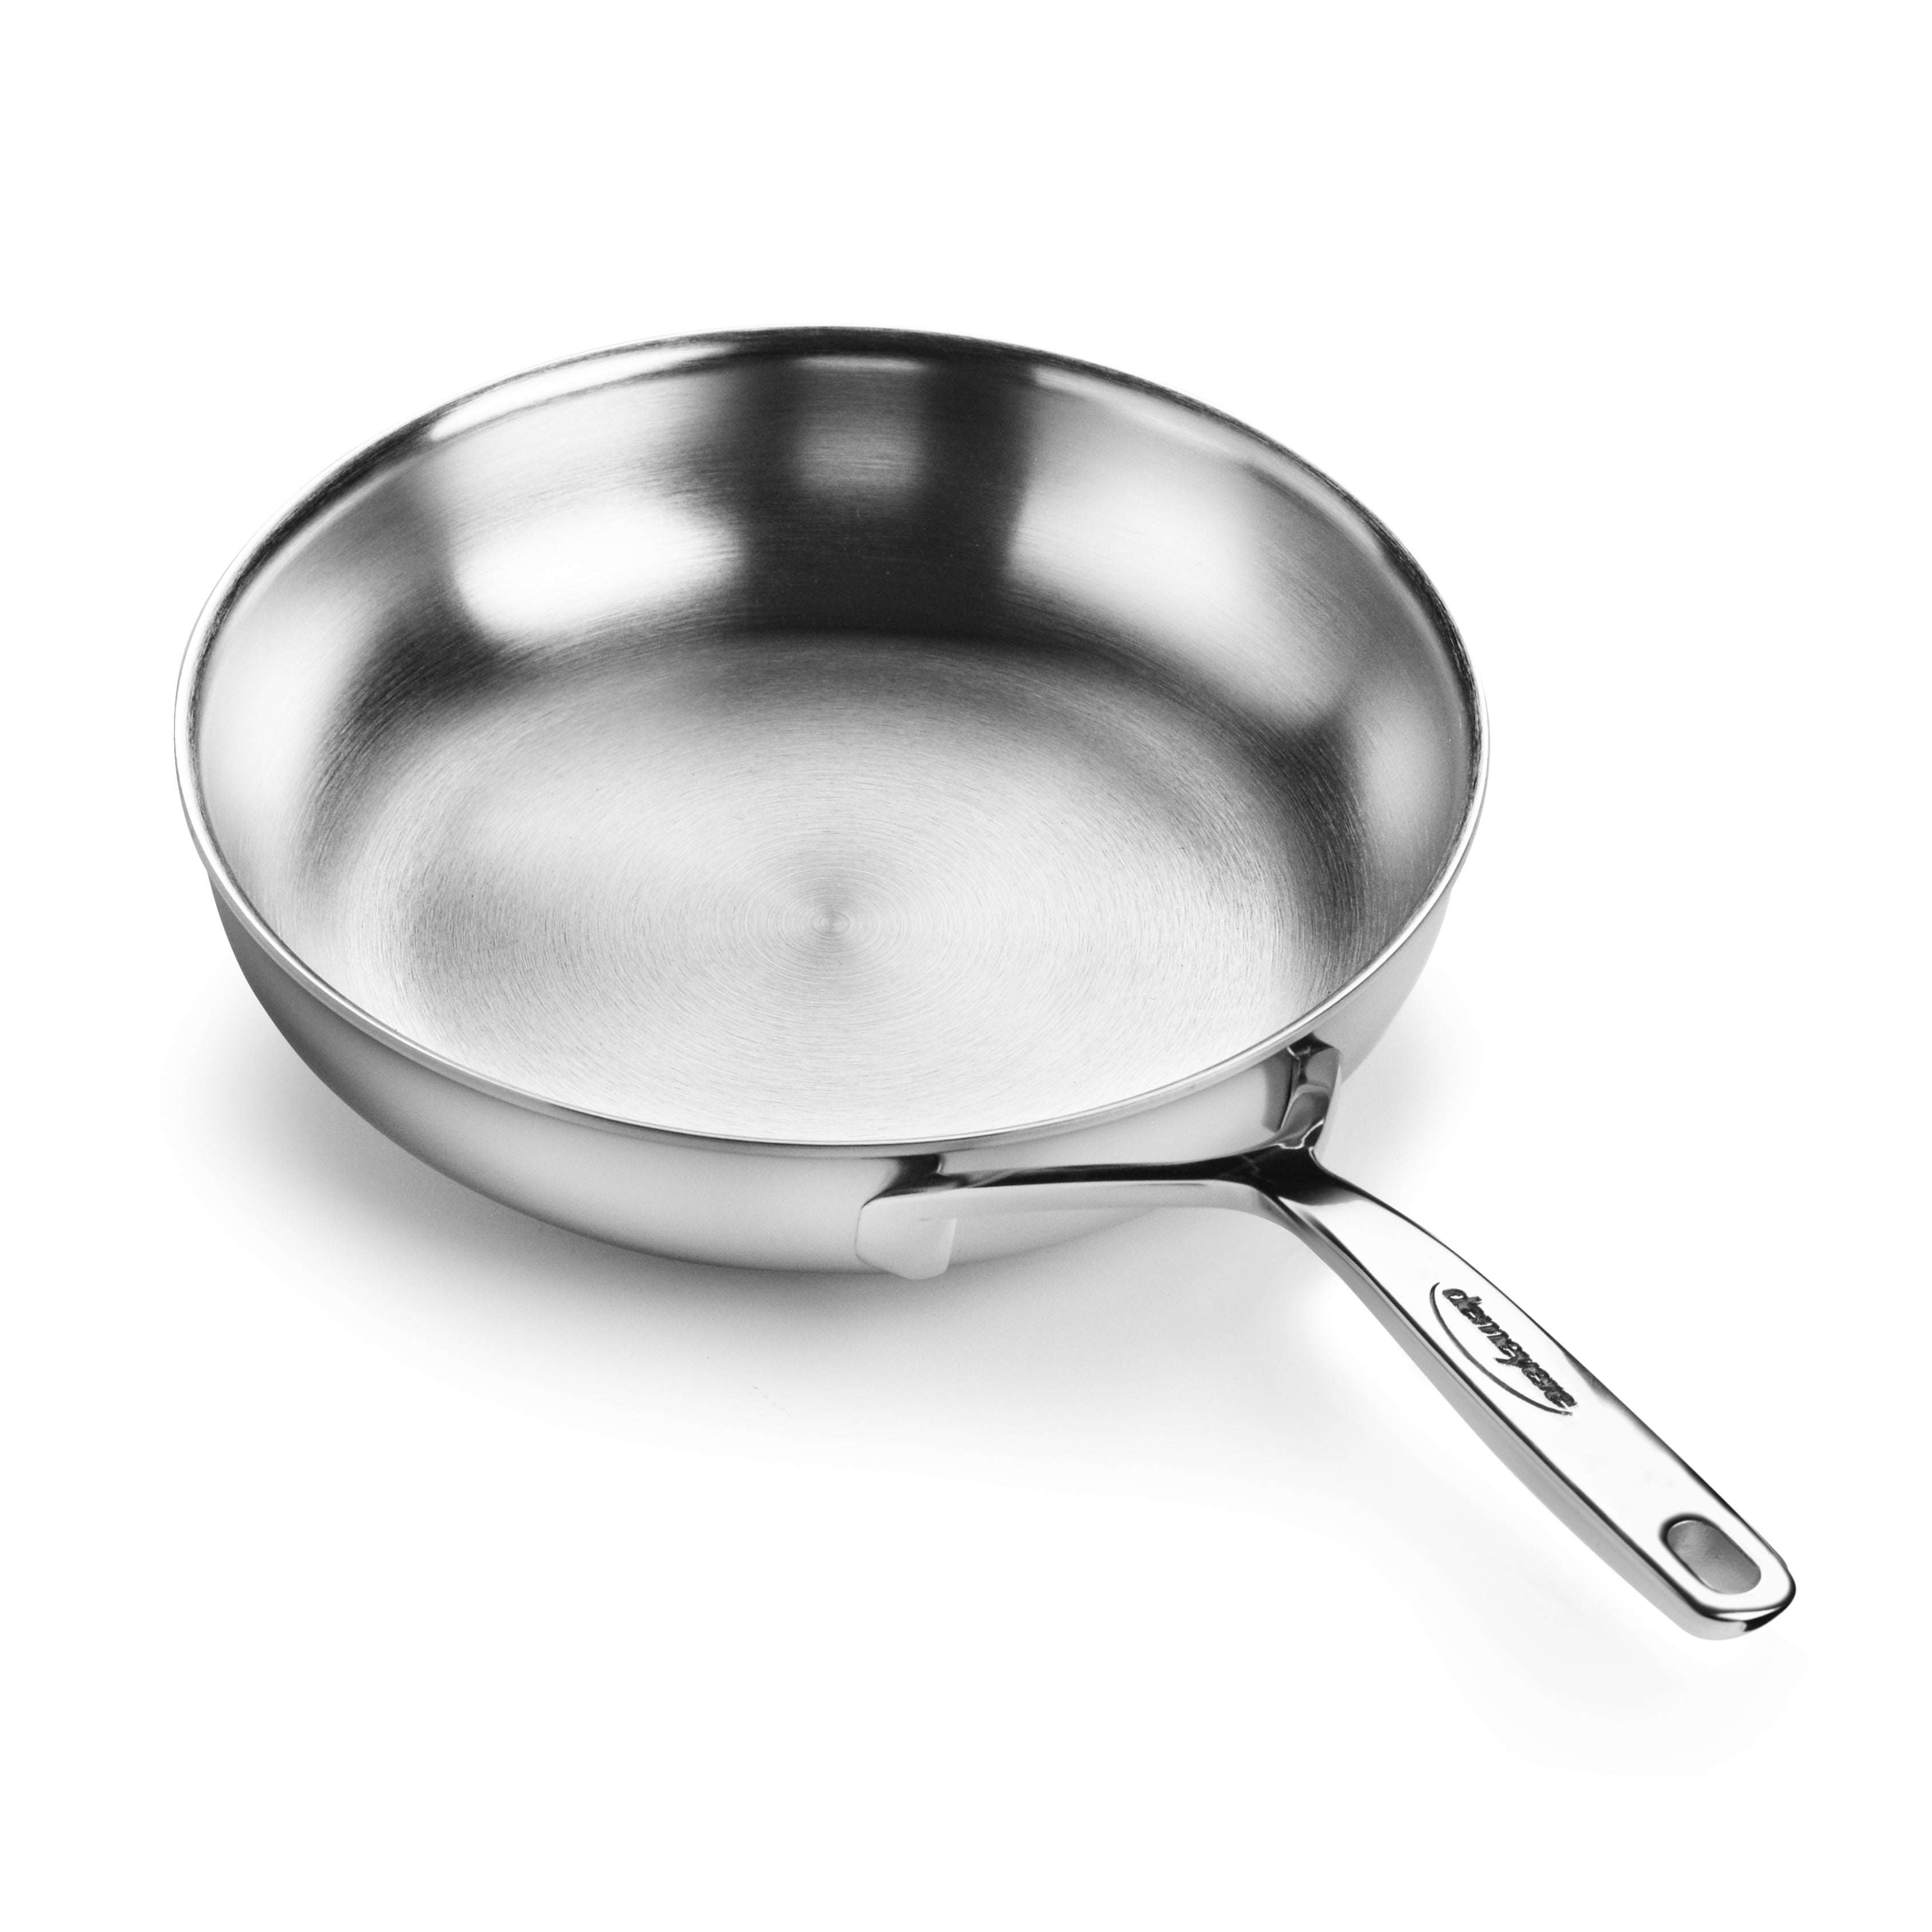 All-Clad Stainless Steel 9 Fry Pan Stainless Steel Nonstick Skillet